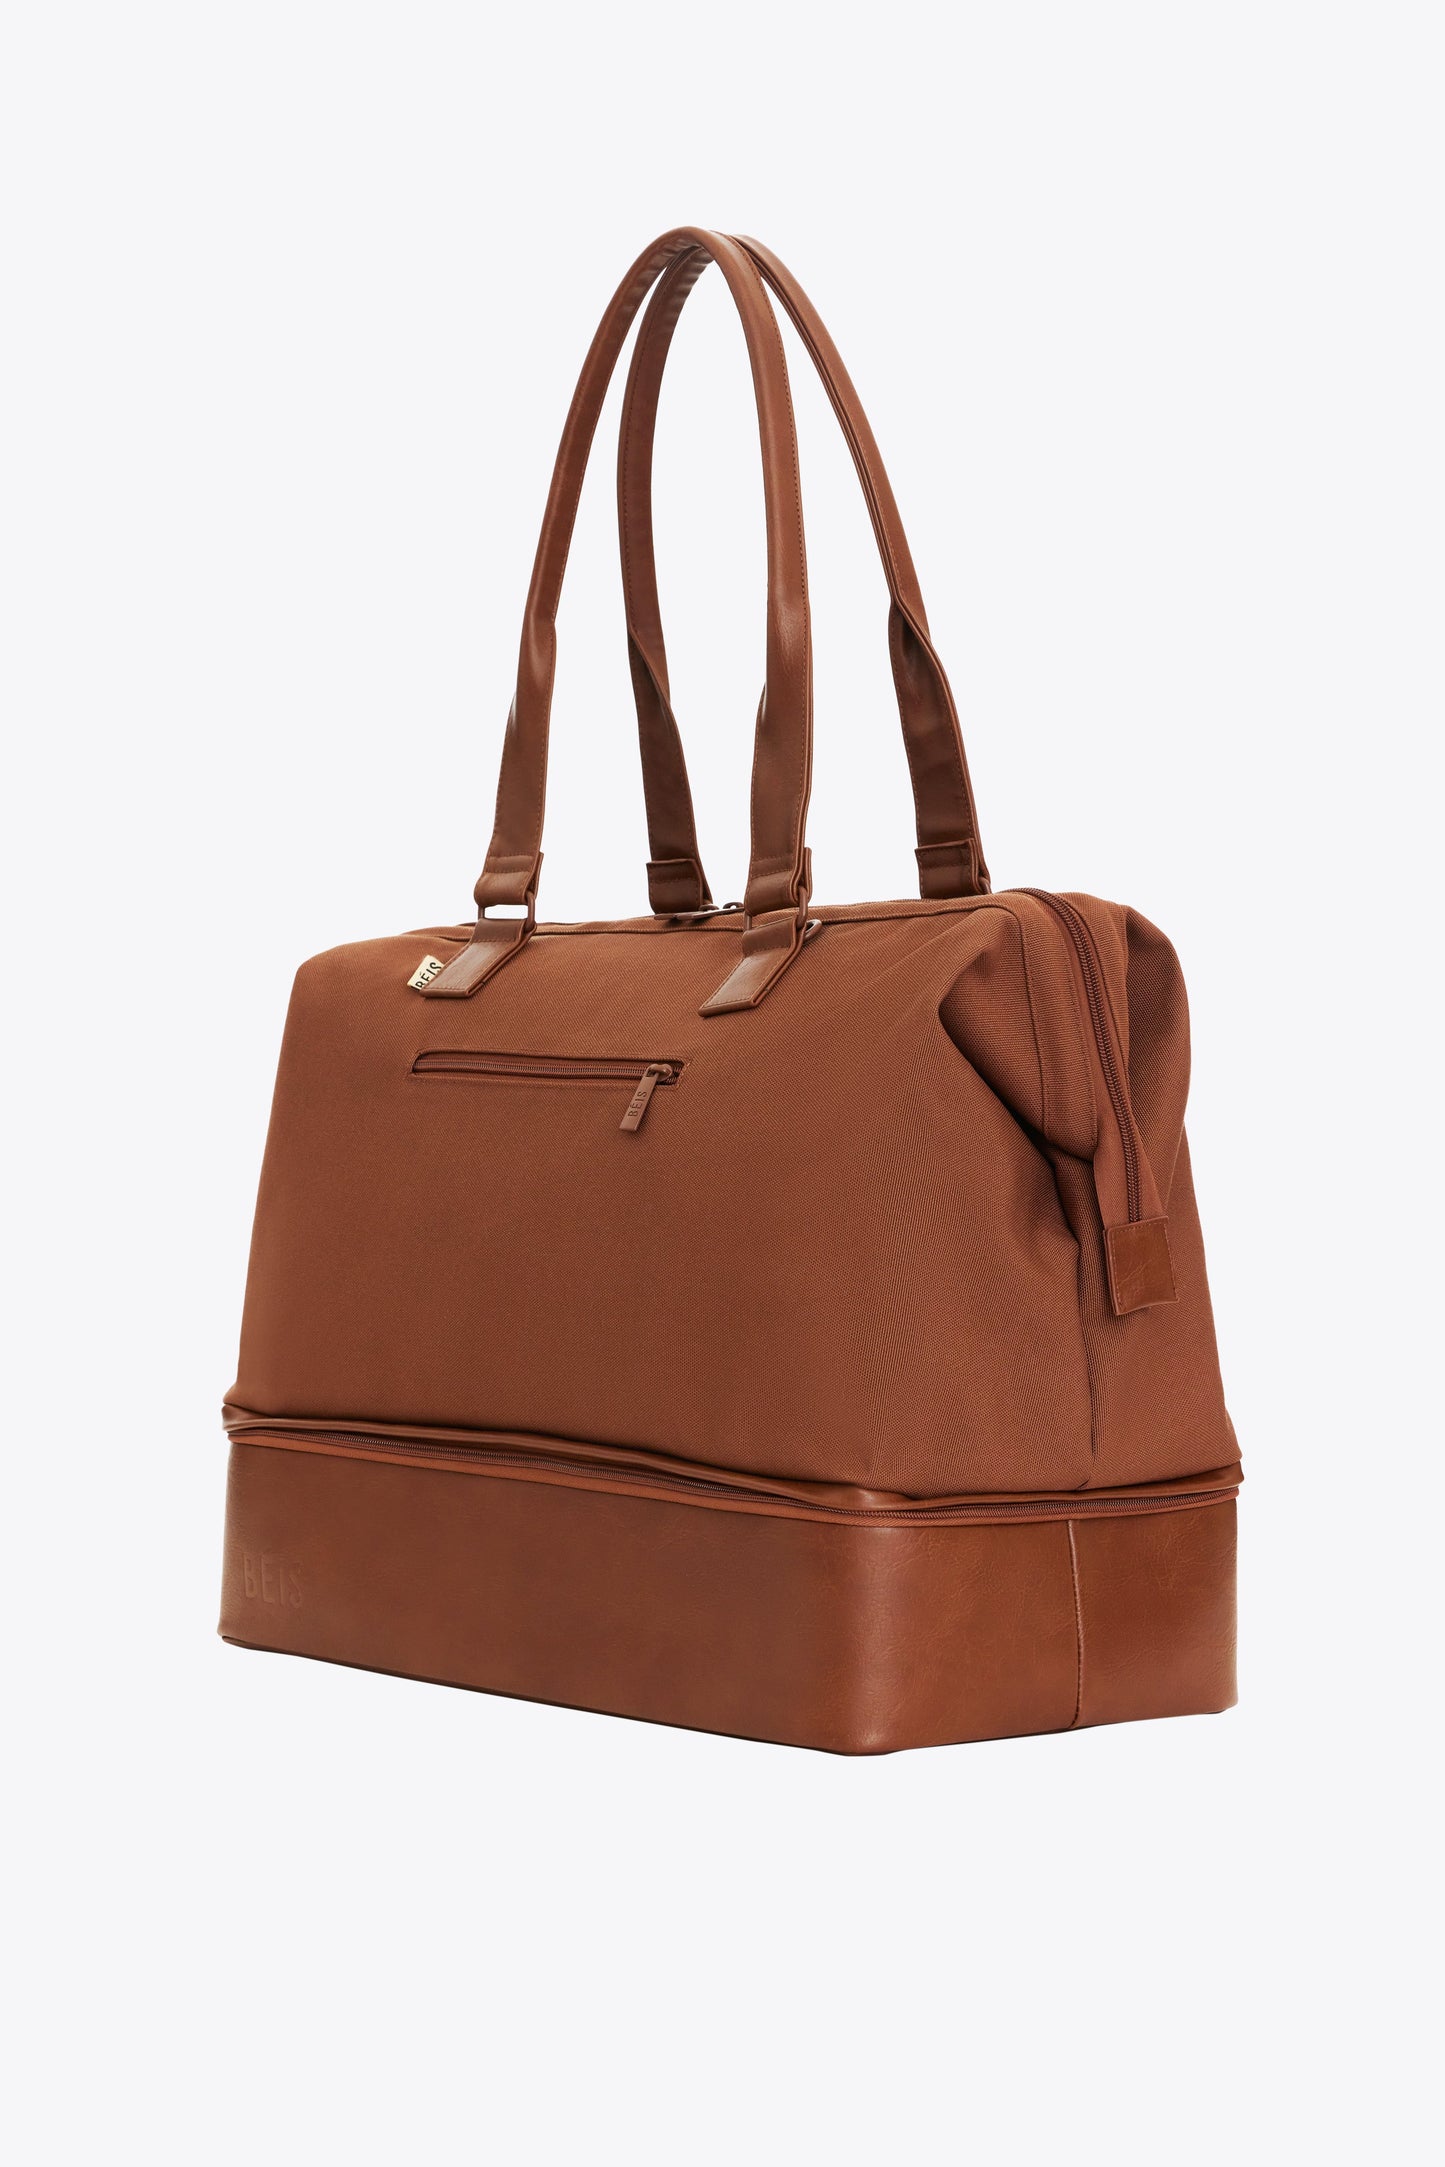 The Convertible Weekender in Maple